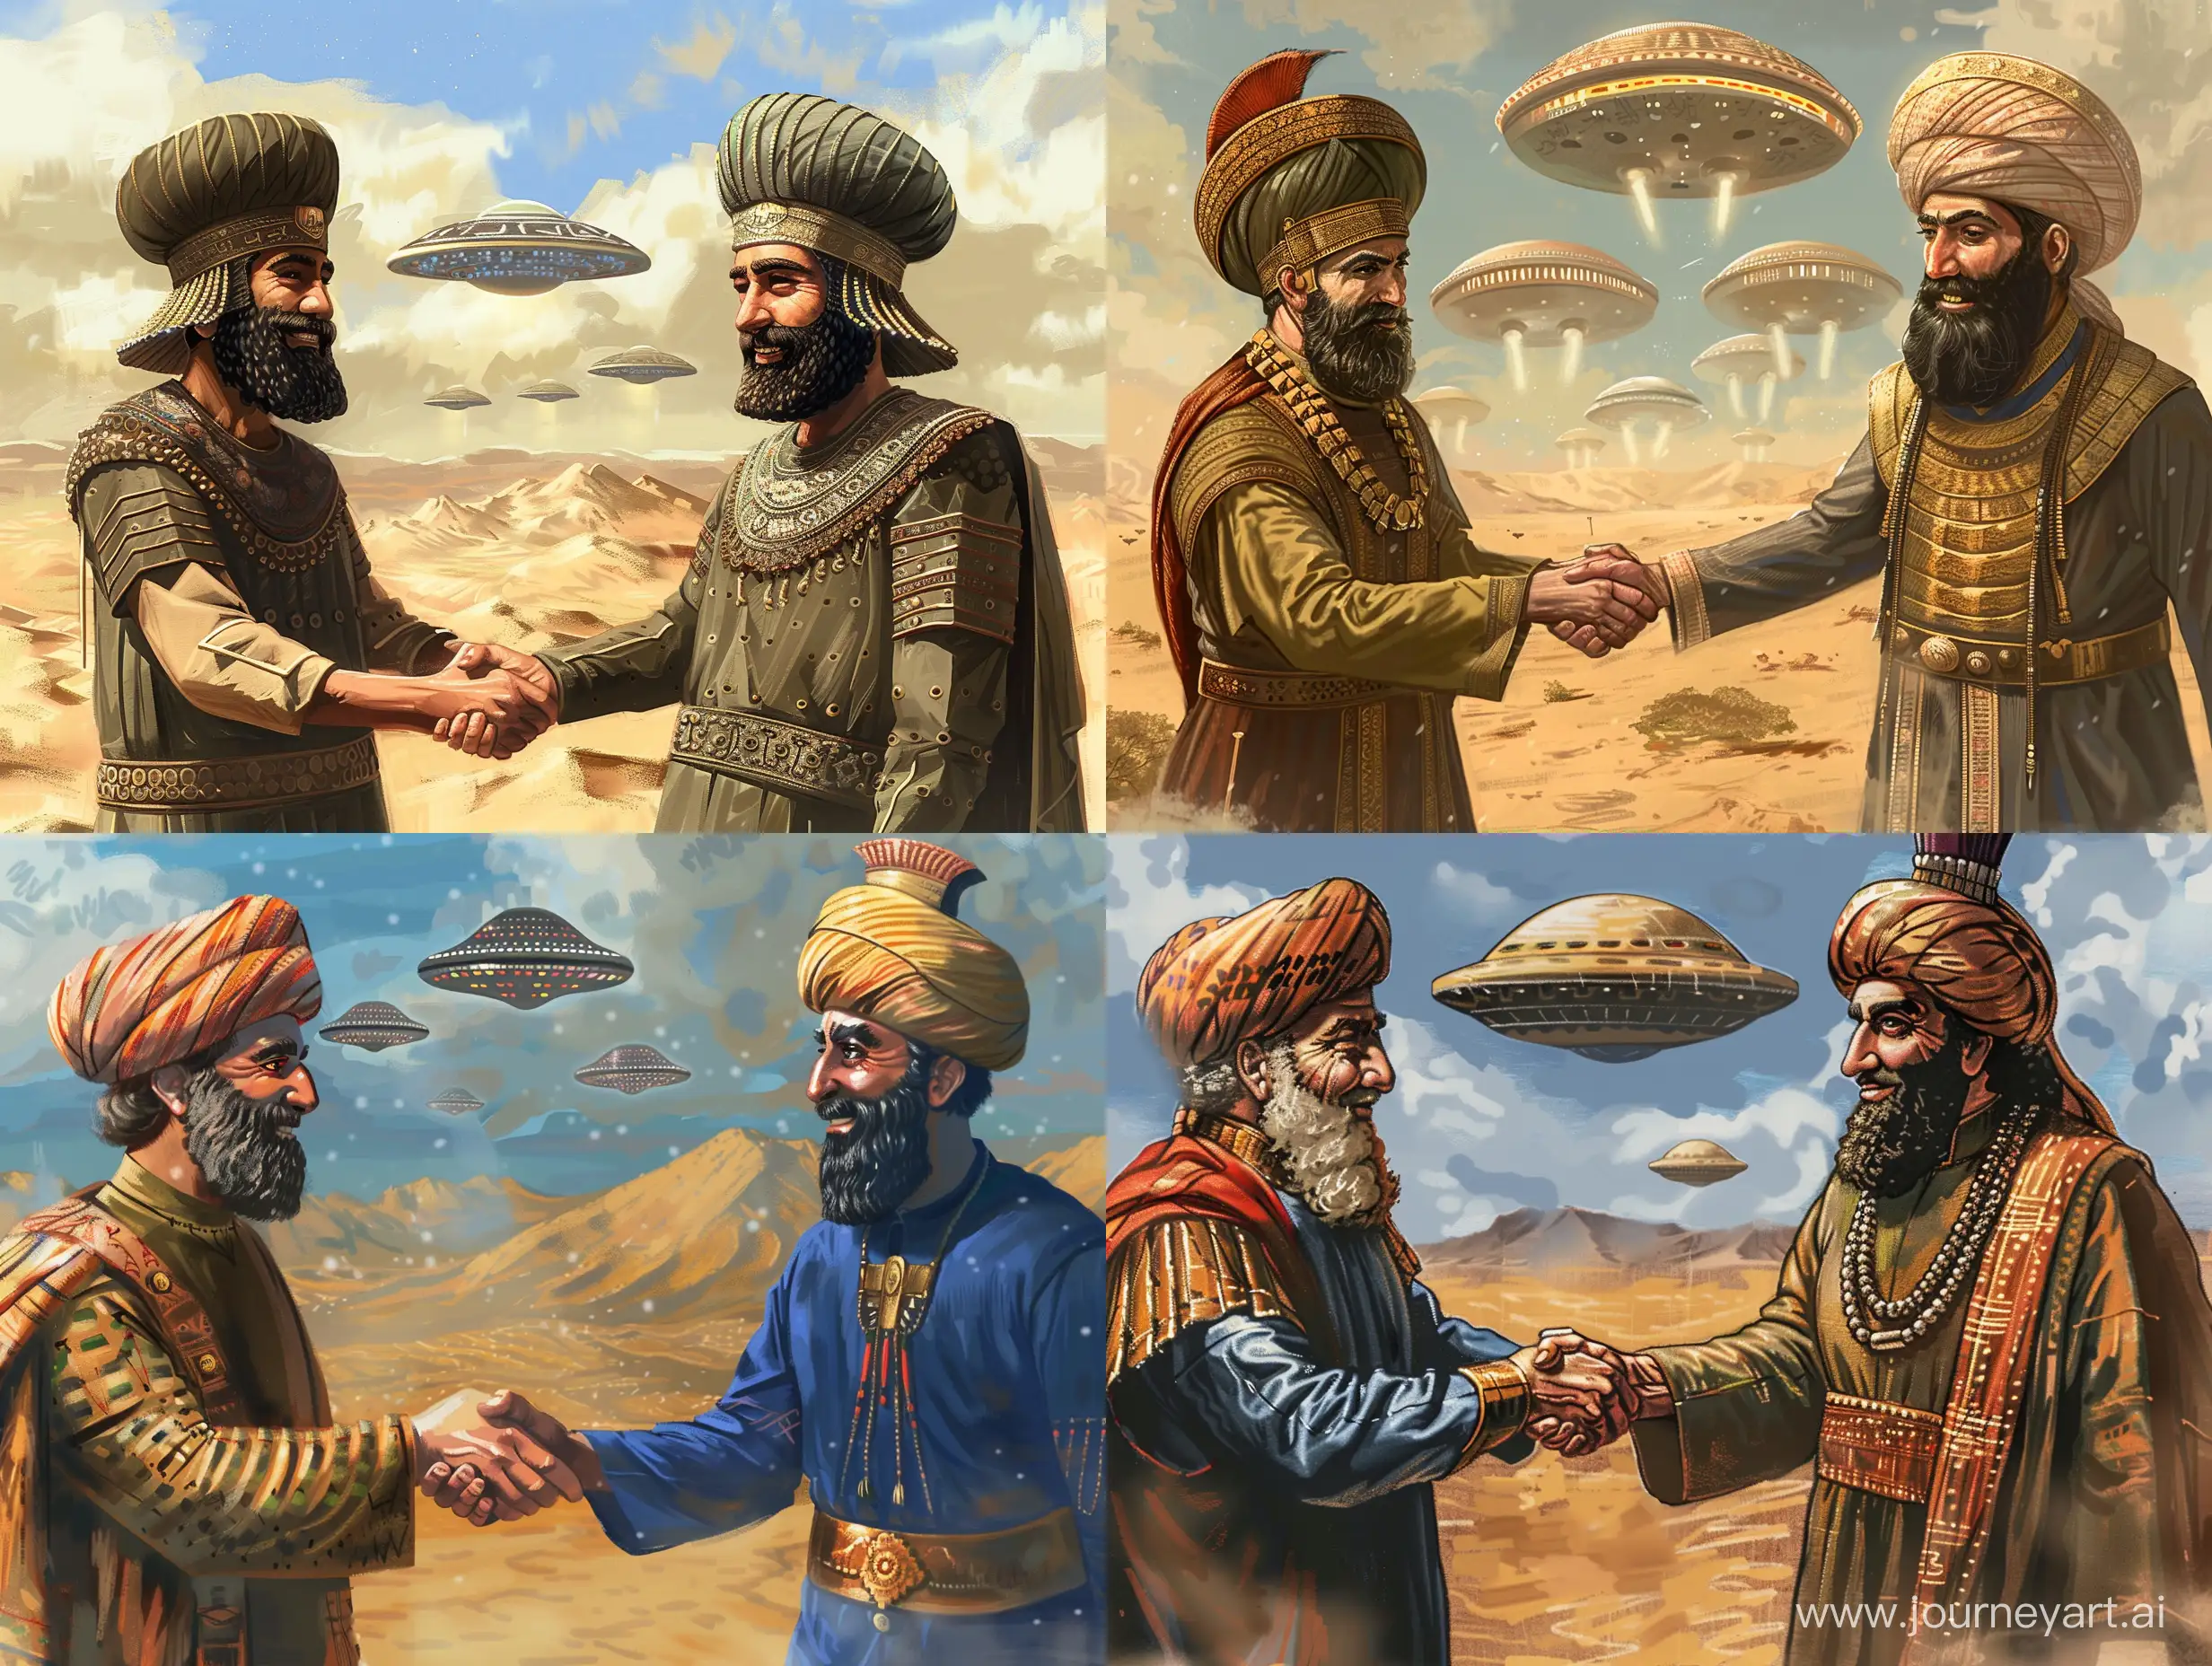 cyrus the great achaemenid empire is shaking Nader Shah Afshar hands and both are smiling, in a desert,lofi,ufos are in background,--q2,--ar7:4